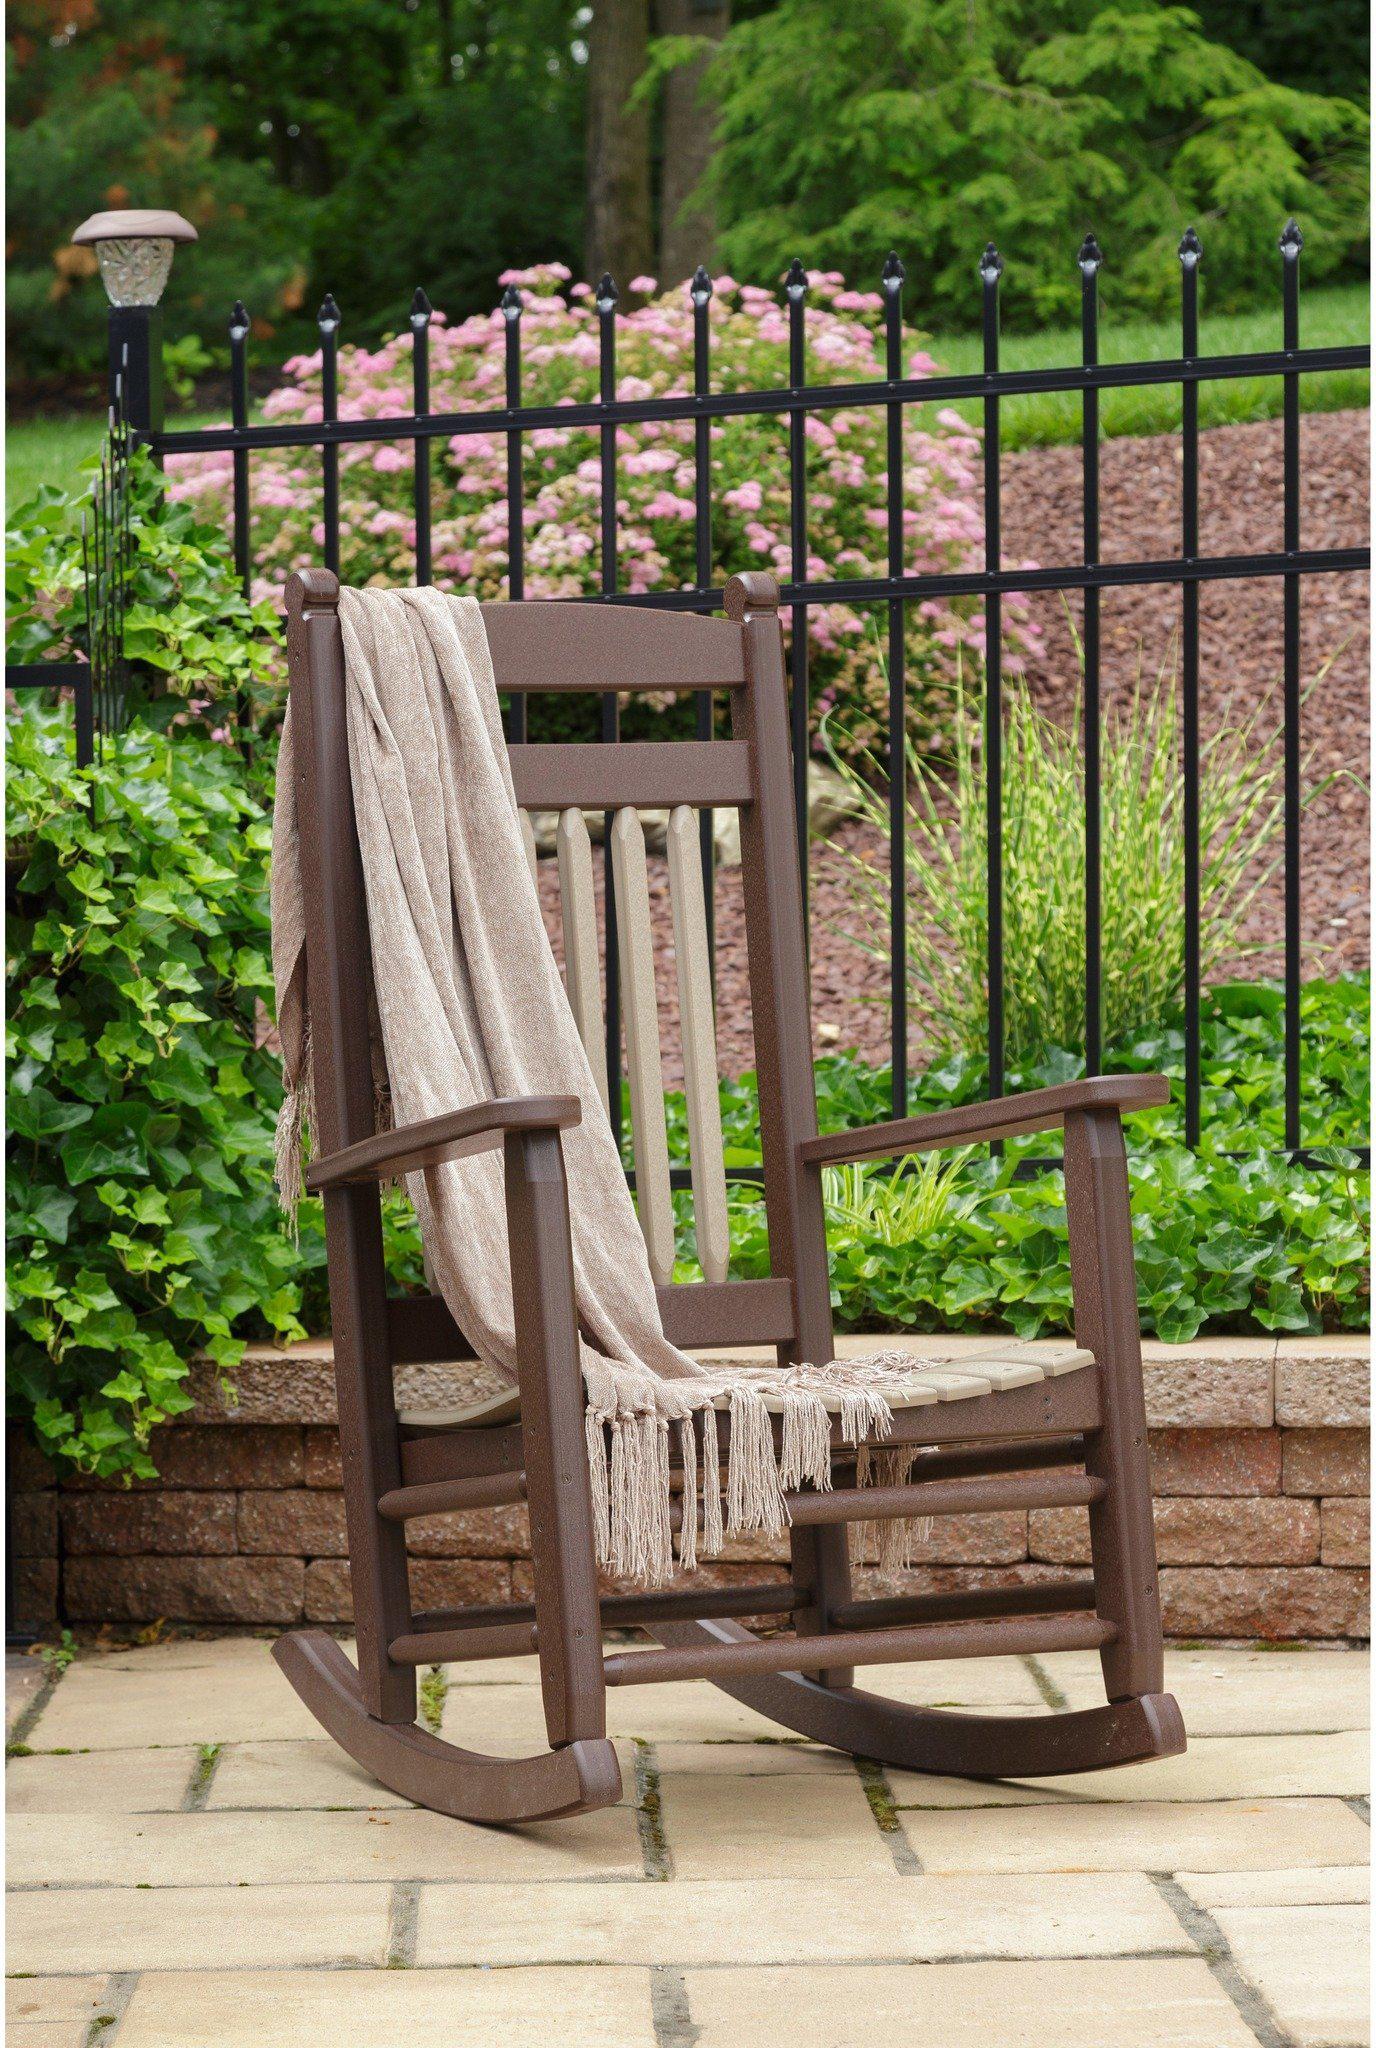 Leisure Lawns Amish Made Recycled Plastic Lumbar Rocking Chair Model #84 - LEAD TIME TO SHIP 4 WEEKS OR LESS